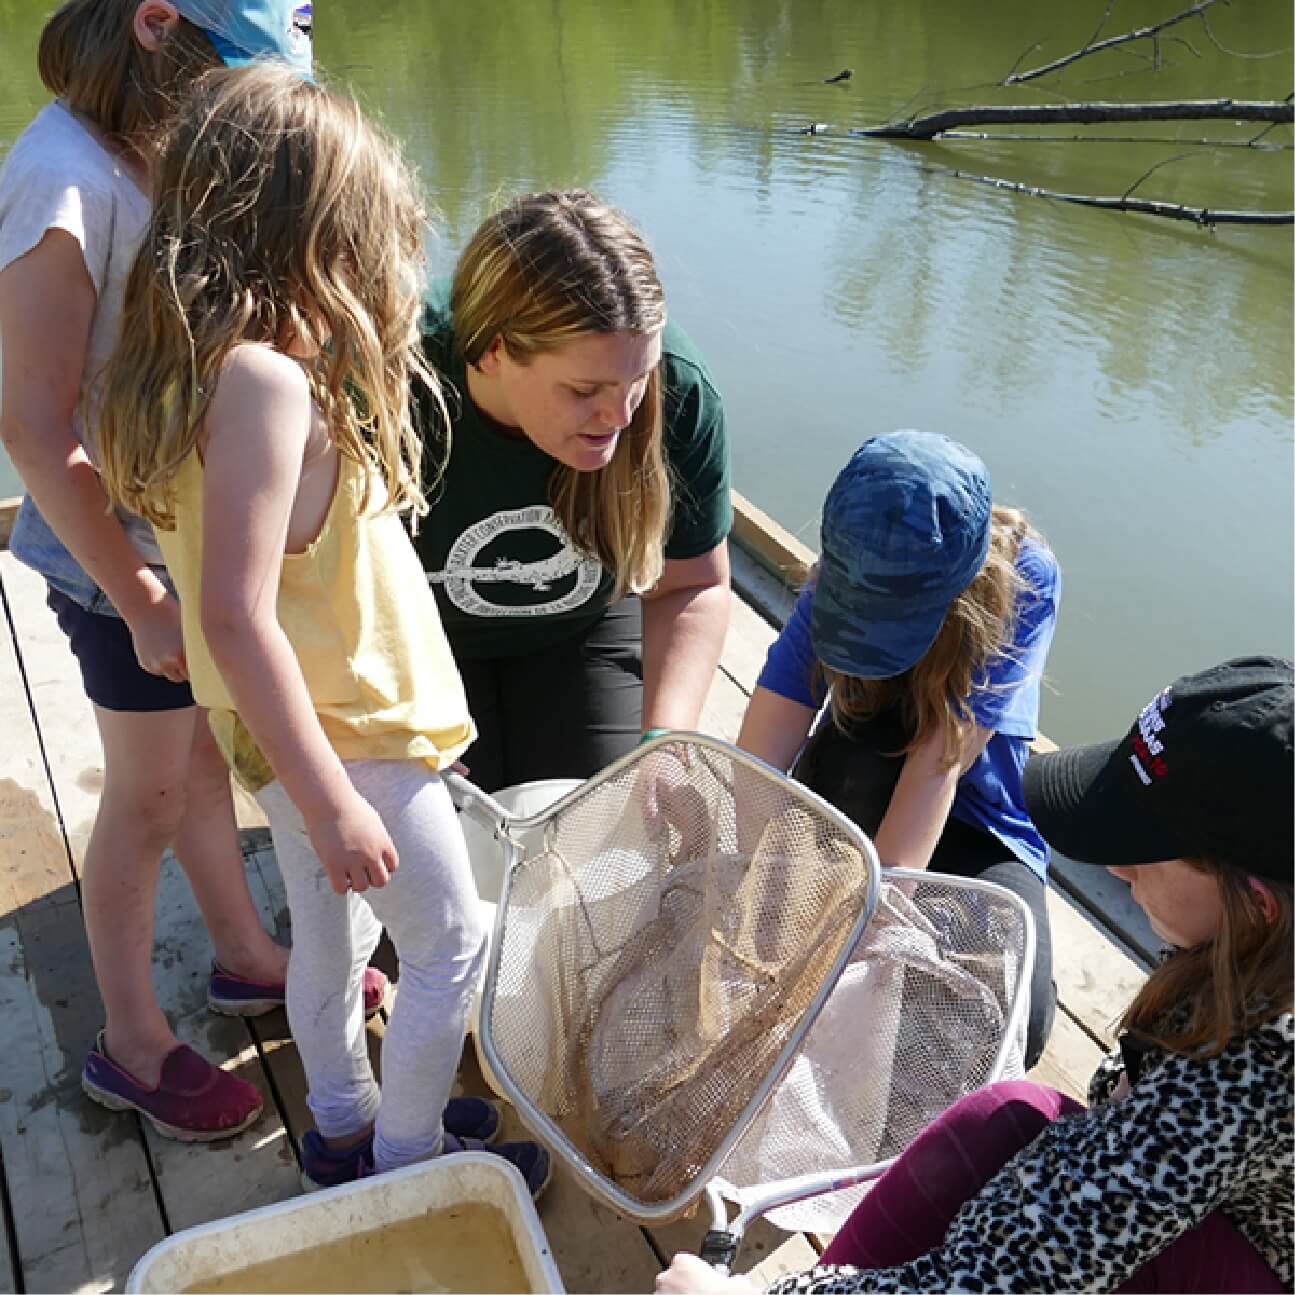 Our Featured Partners.  Click here to learn more about the Rideau Valley Conservation Authority organization that provides hands-on watershed restoration and nature experiences for youth. The picture shown is a teacher and four students looking into a net to see what they caught.